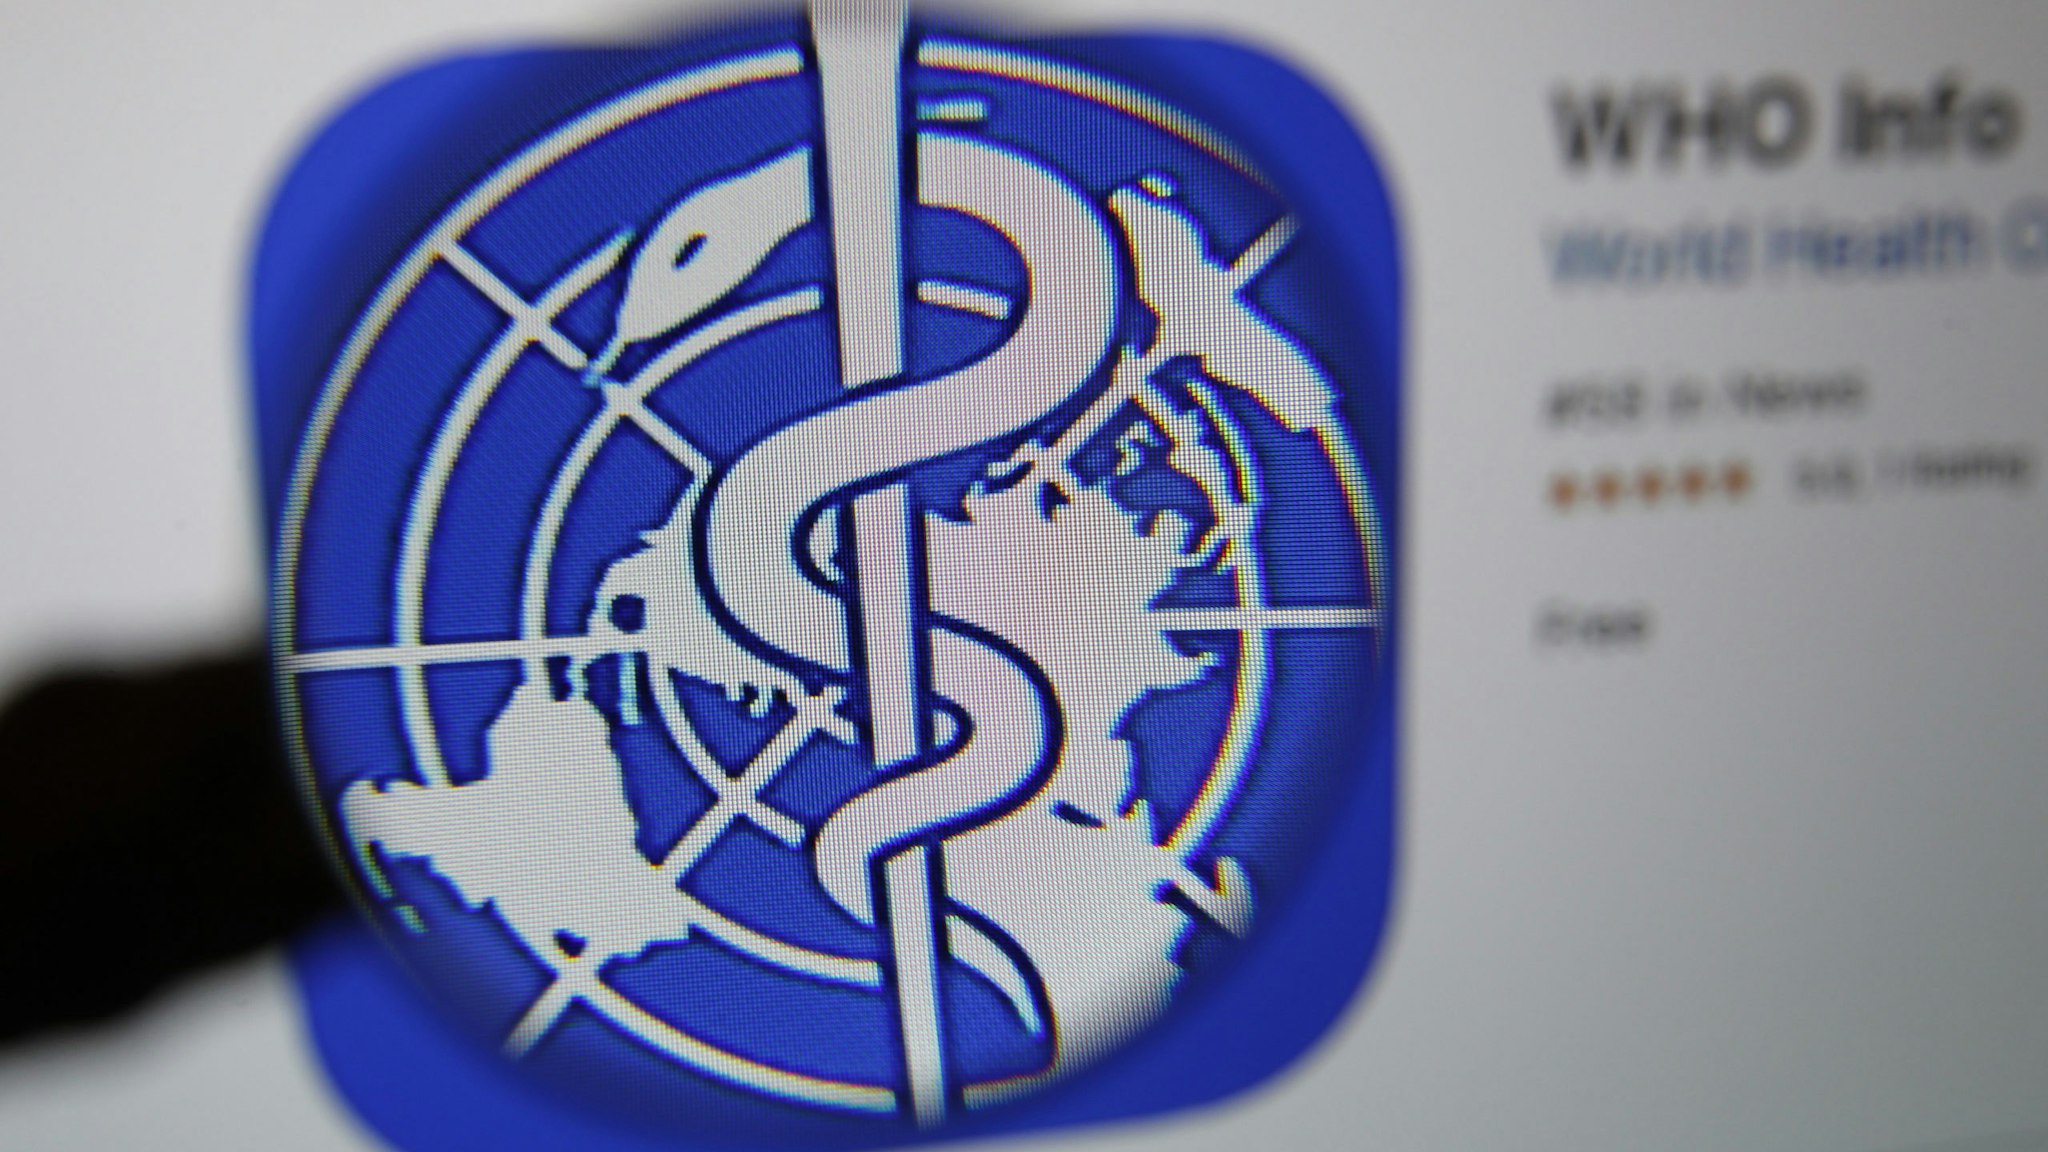 The logo for the World Health Organization (WHO) WHO Info application is displayed on a computer screen in an arranged photograph taken in Bern, Switzerland, on Tuesday, March 31, 2020. The Covid-19 pandemic has triggered a seismic wave of health awareness and anxiety, which is energizing a new category of virus-fighting tech and apps. Photographer: Stefan Wermuth/Bloomberg via Getty Images